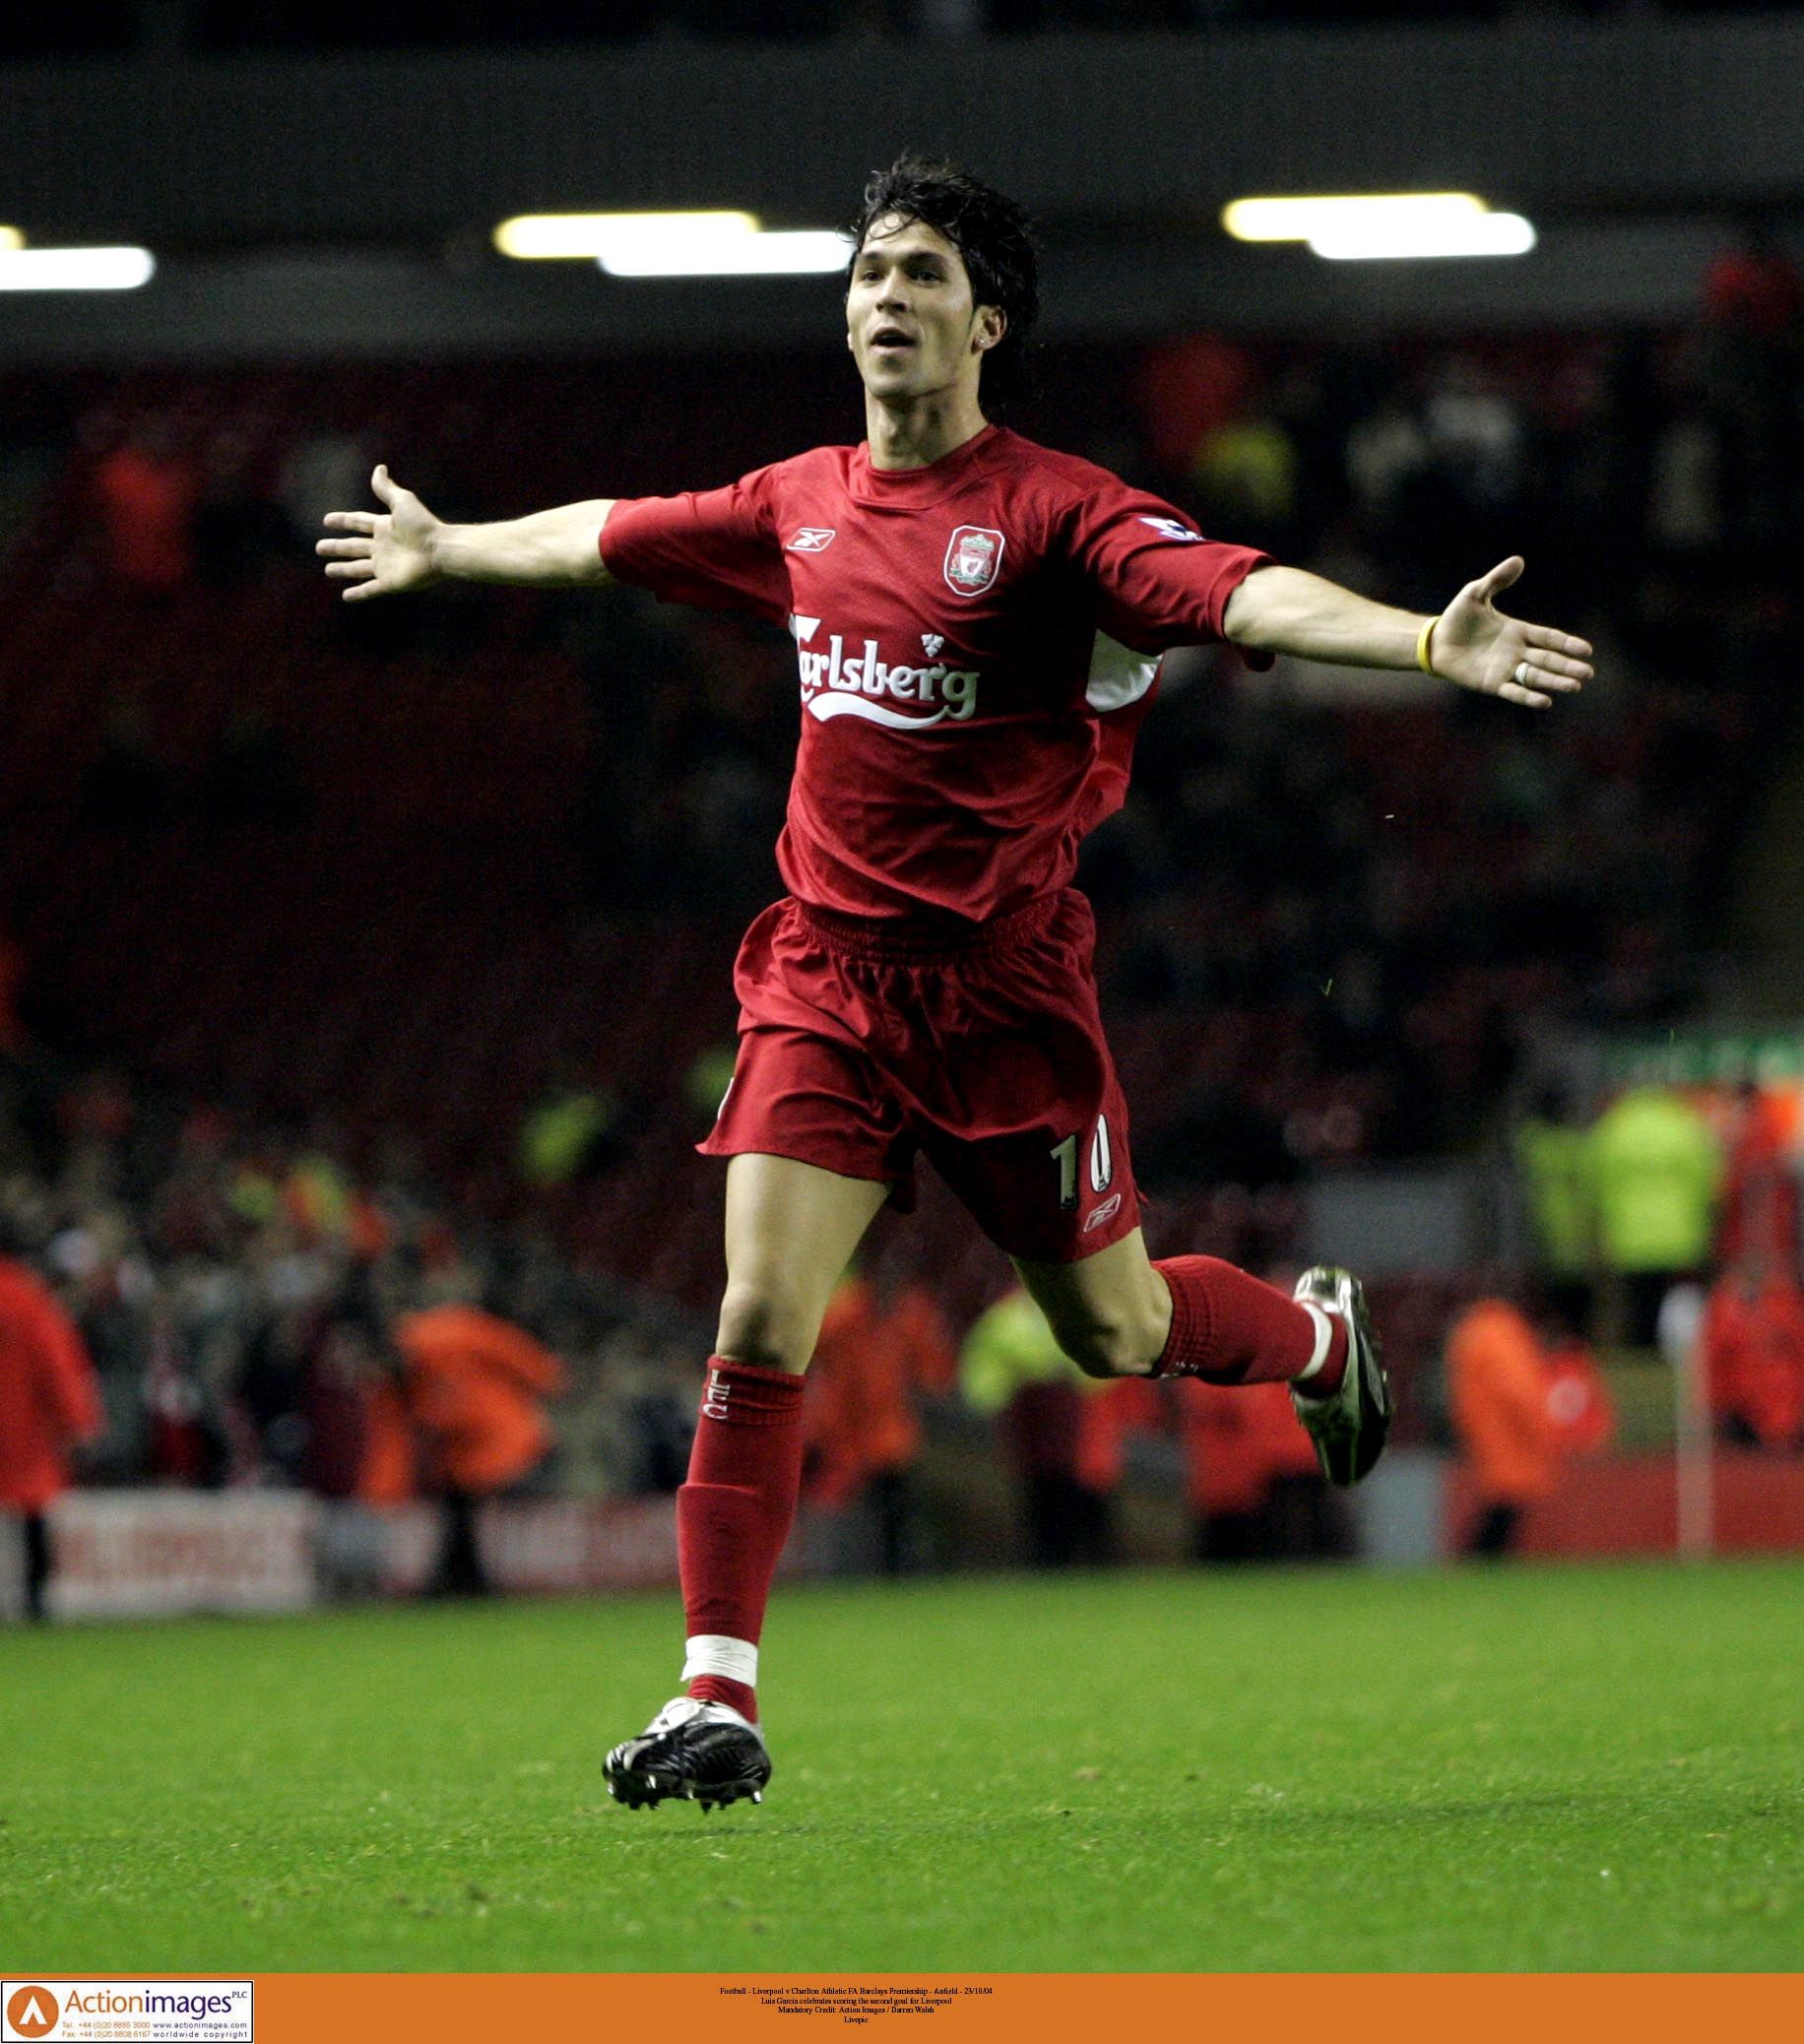 Football - Liverpool v Charlton Athletic FA Barclays Premiership - Anfield - 23/10/04 
Luis Garcia celebrates scoring the second goal for Liverpool 
Mandatory Credit: Action Images / Darren Walsh 
Livepic 
NO ONLINE/INTERNET USE WITHOUT A LICENCE FROM THE FOOTBALL DATA CO LTD. FOR LICENCE ENQUIRIES PLEASE TELEPHONE +44 207 298 1656.